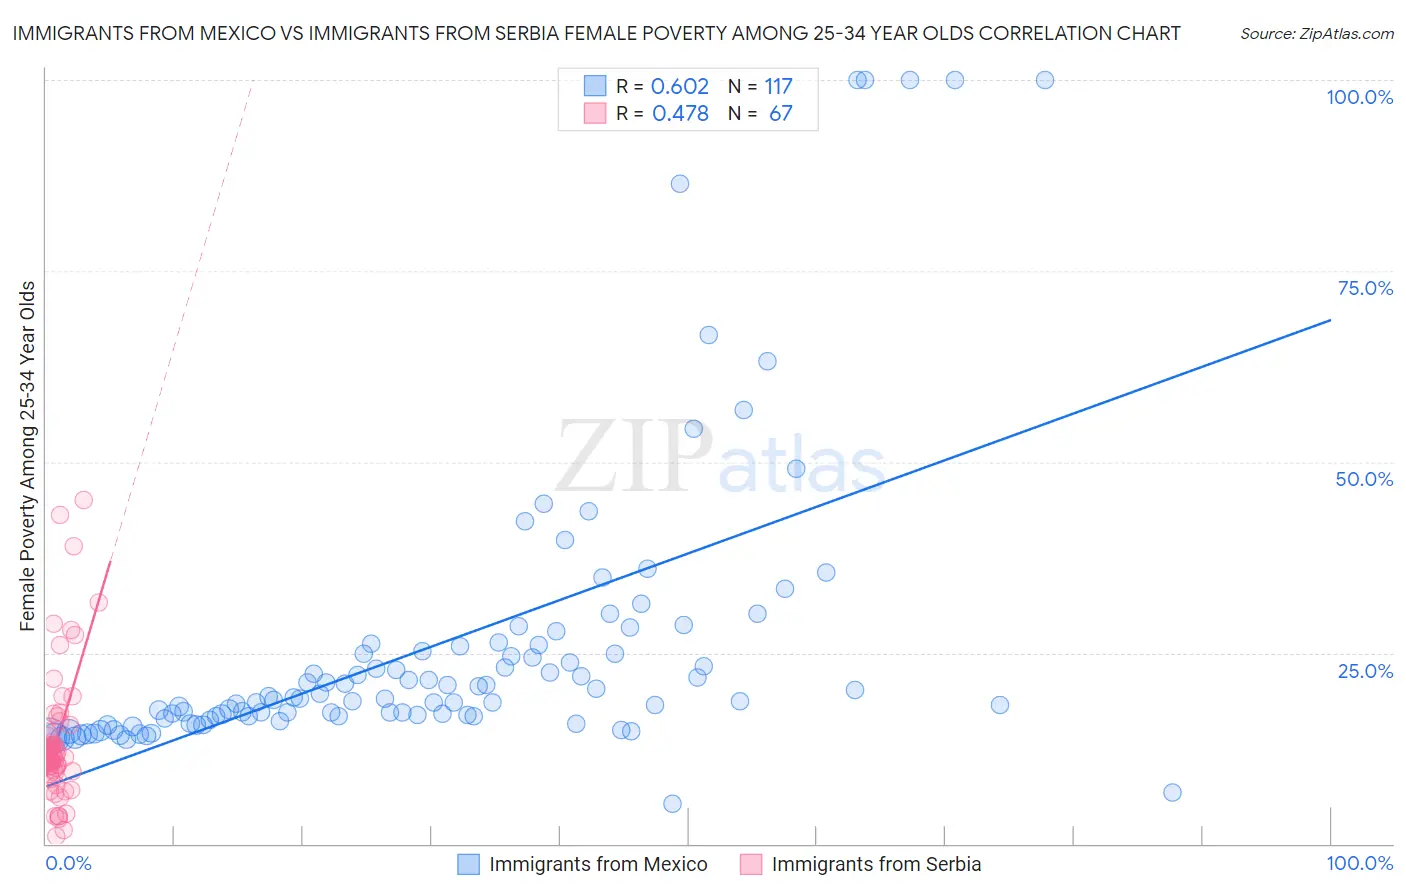 Immigrants from Mexico vs Immigrants from Serbia Female Poverty Among 25-34 Year Olds